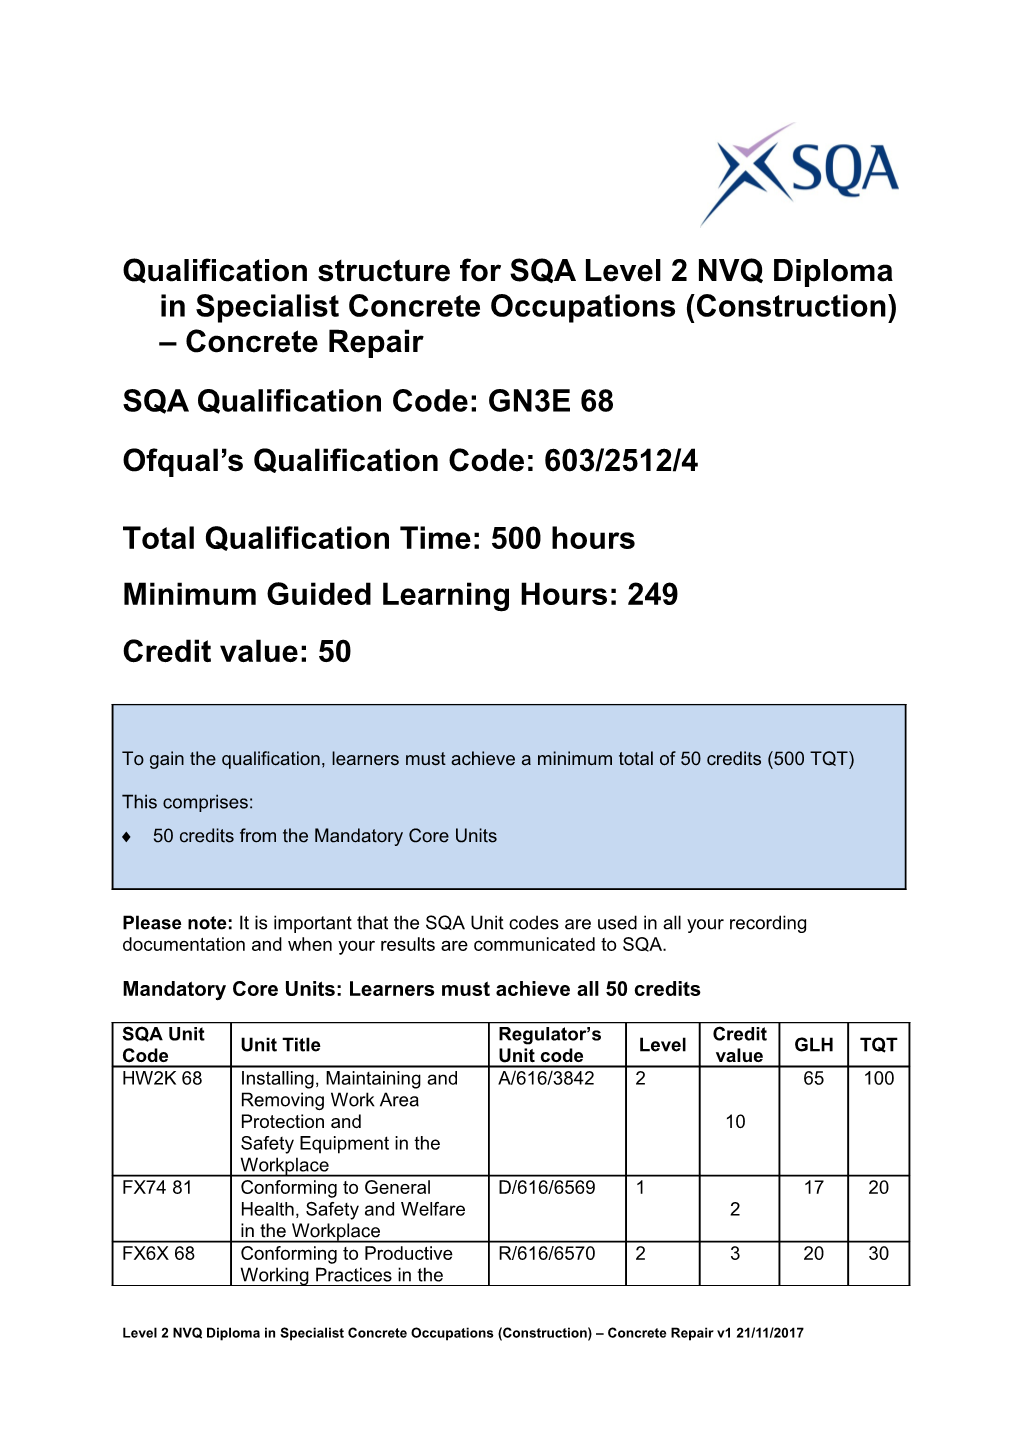 Qualification Structure for SQA Level 2NVQ Diploma Inspecialist Concrete Occupations